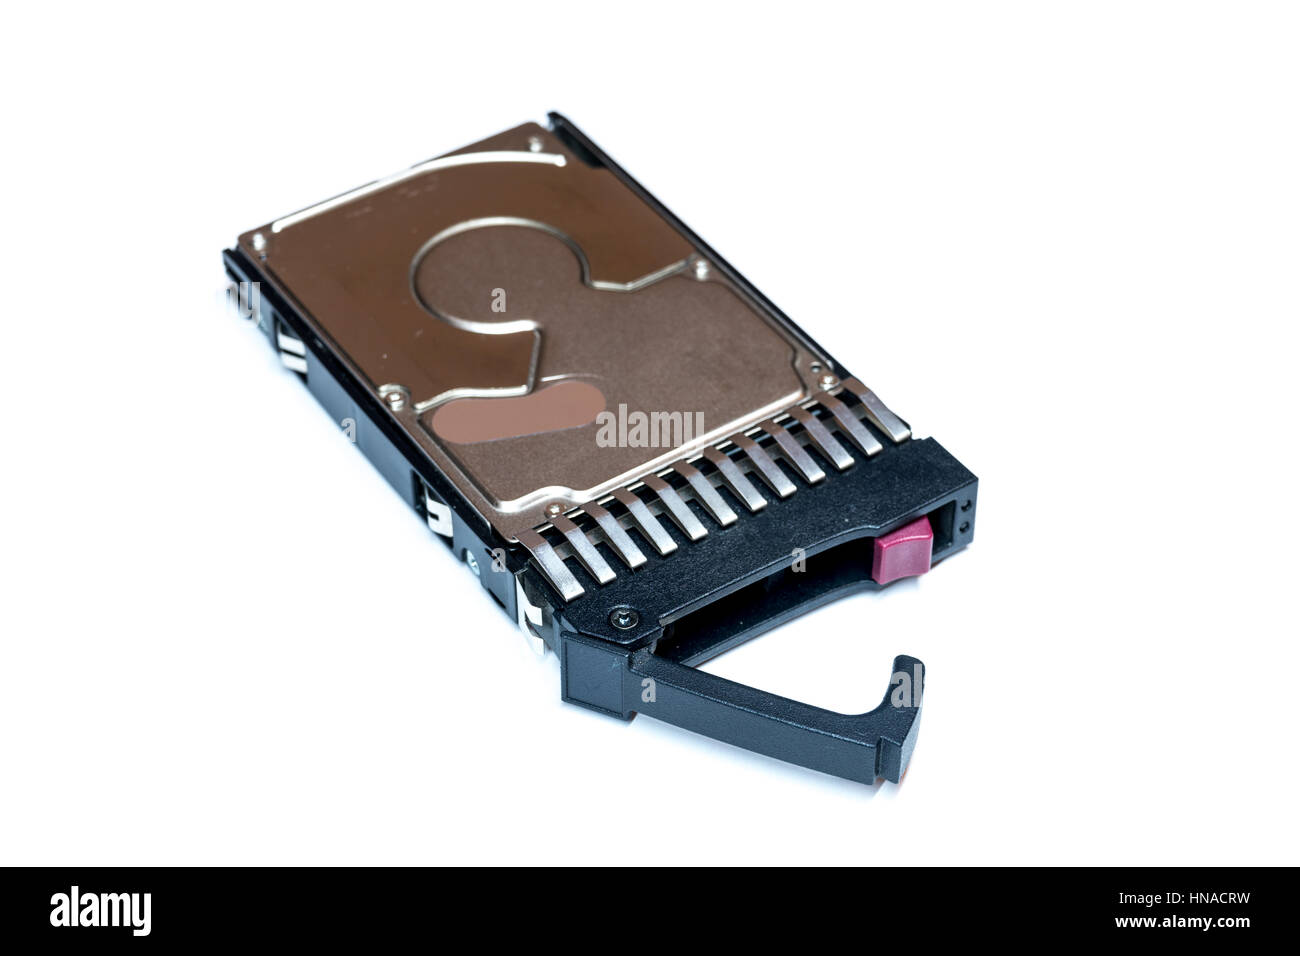 Close up of hot plug SAS computer disk drive HDD in tray isolated on white background Stock Photo